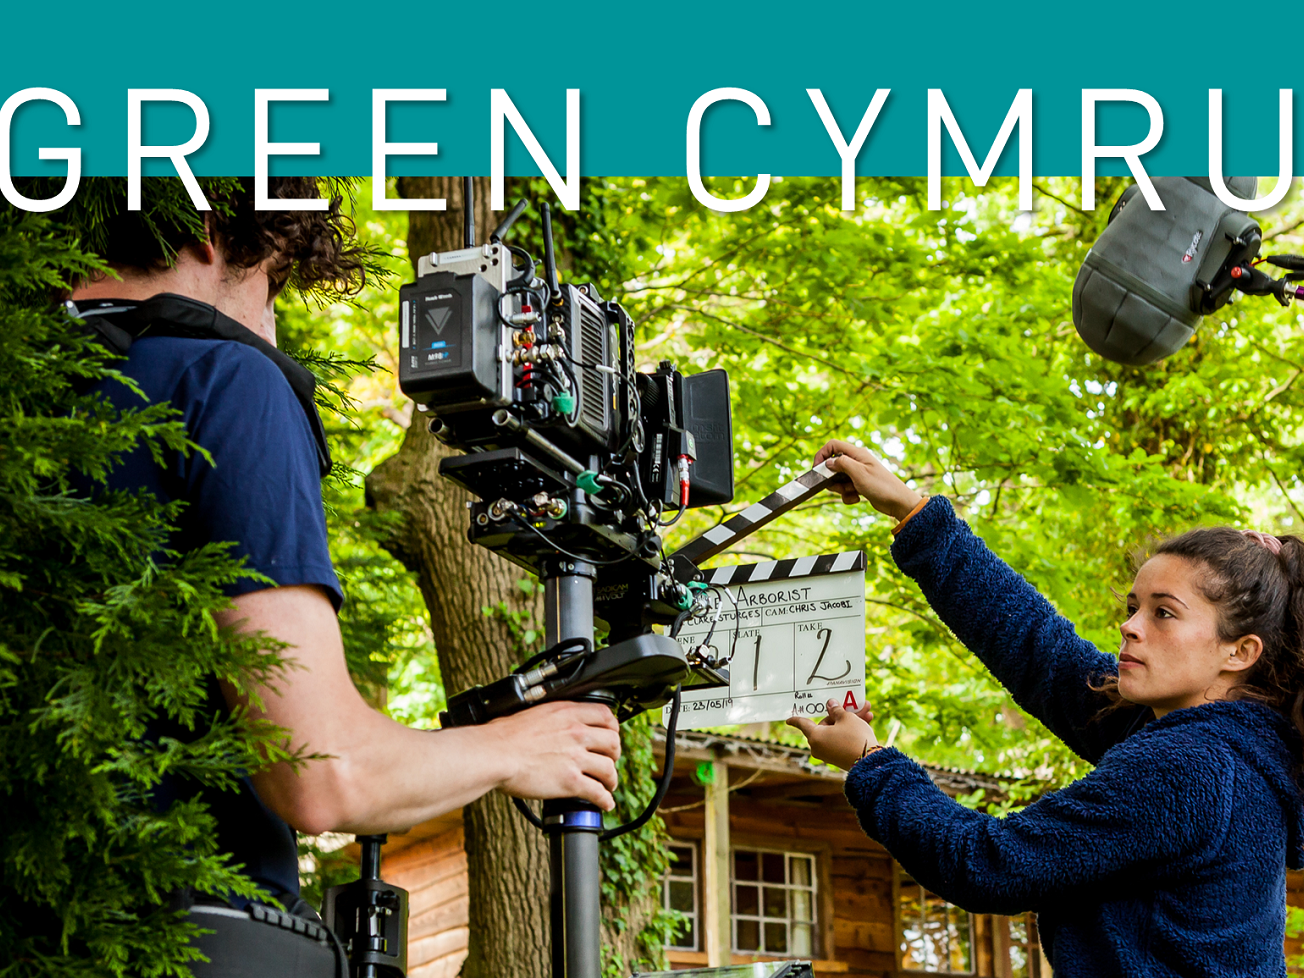 Image reads: Green Cyru and features man holding a camera and woman holding a clapper board